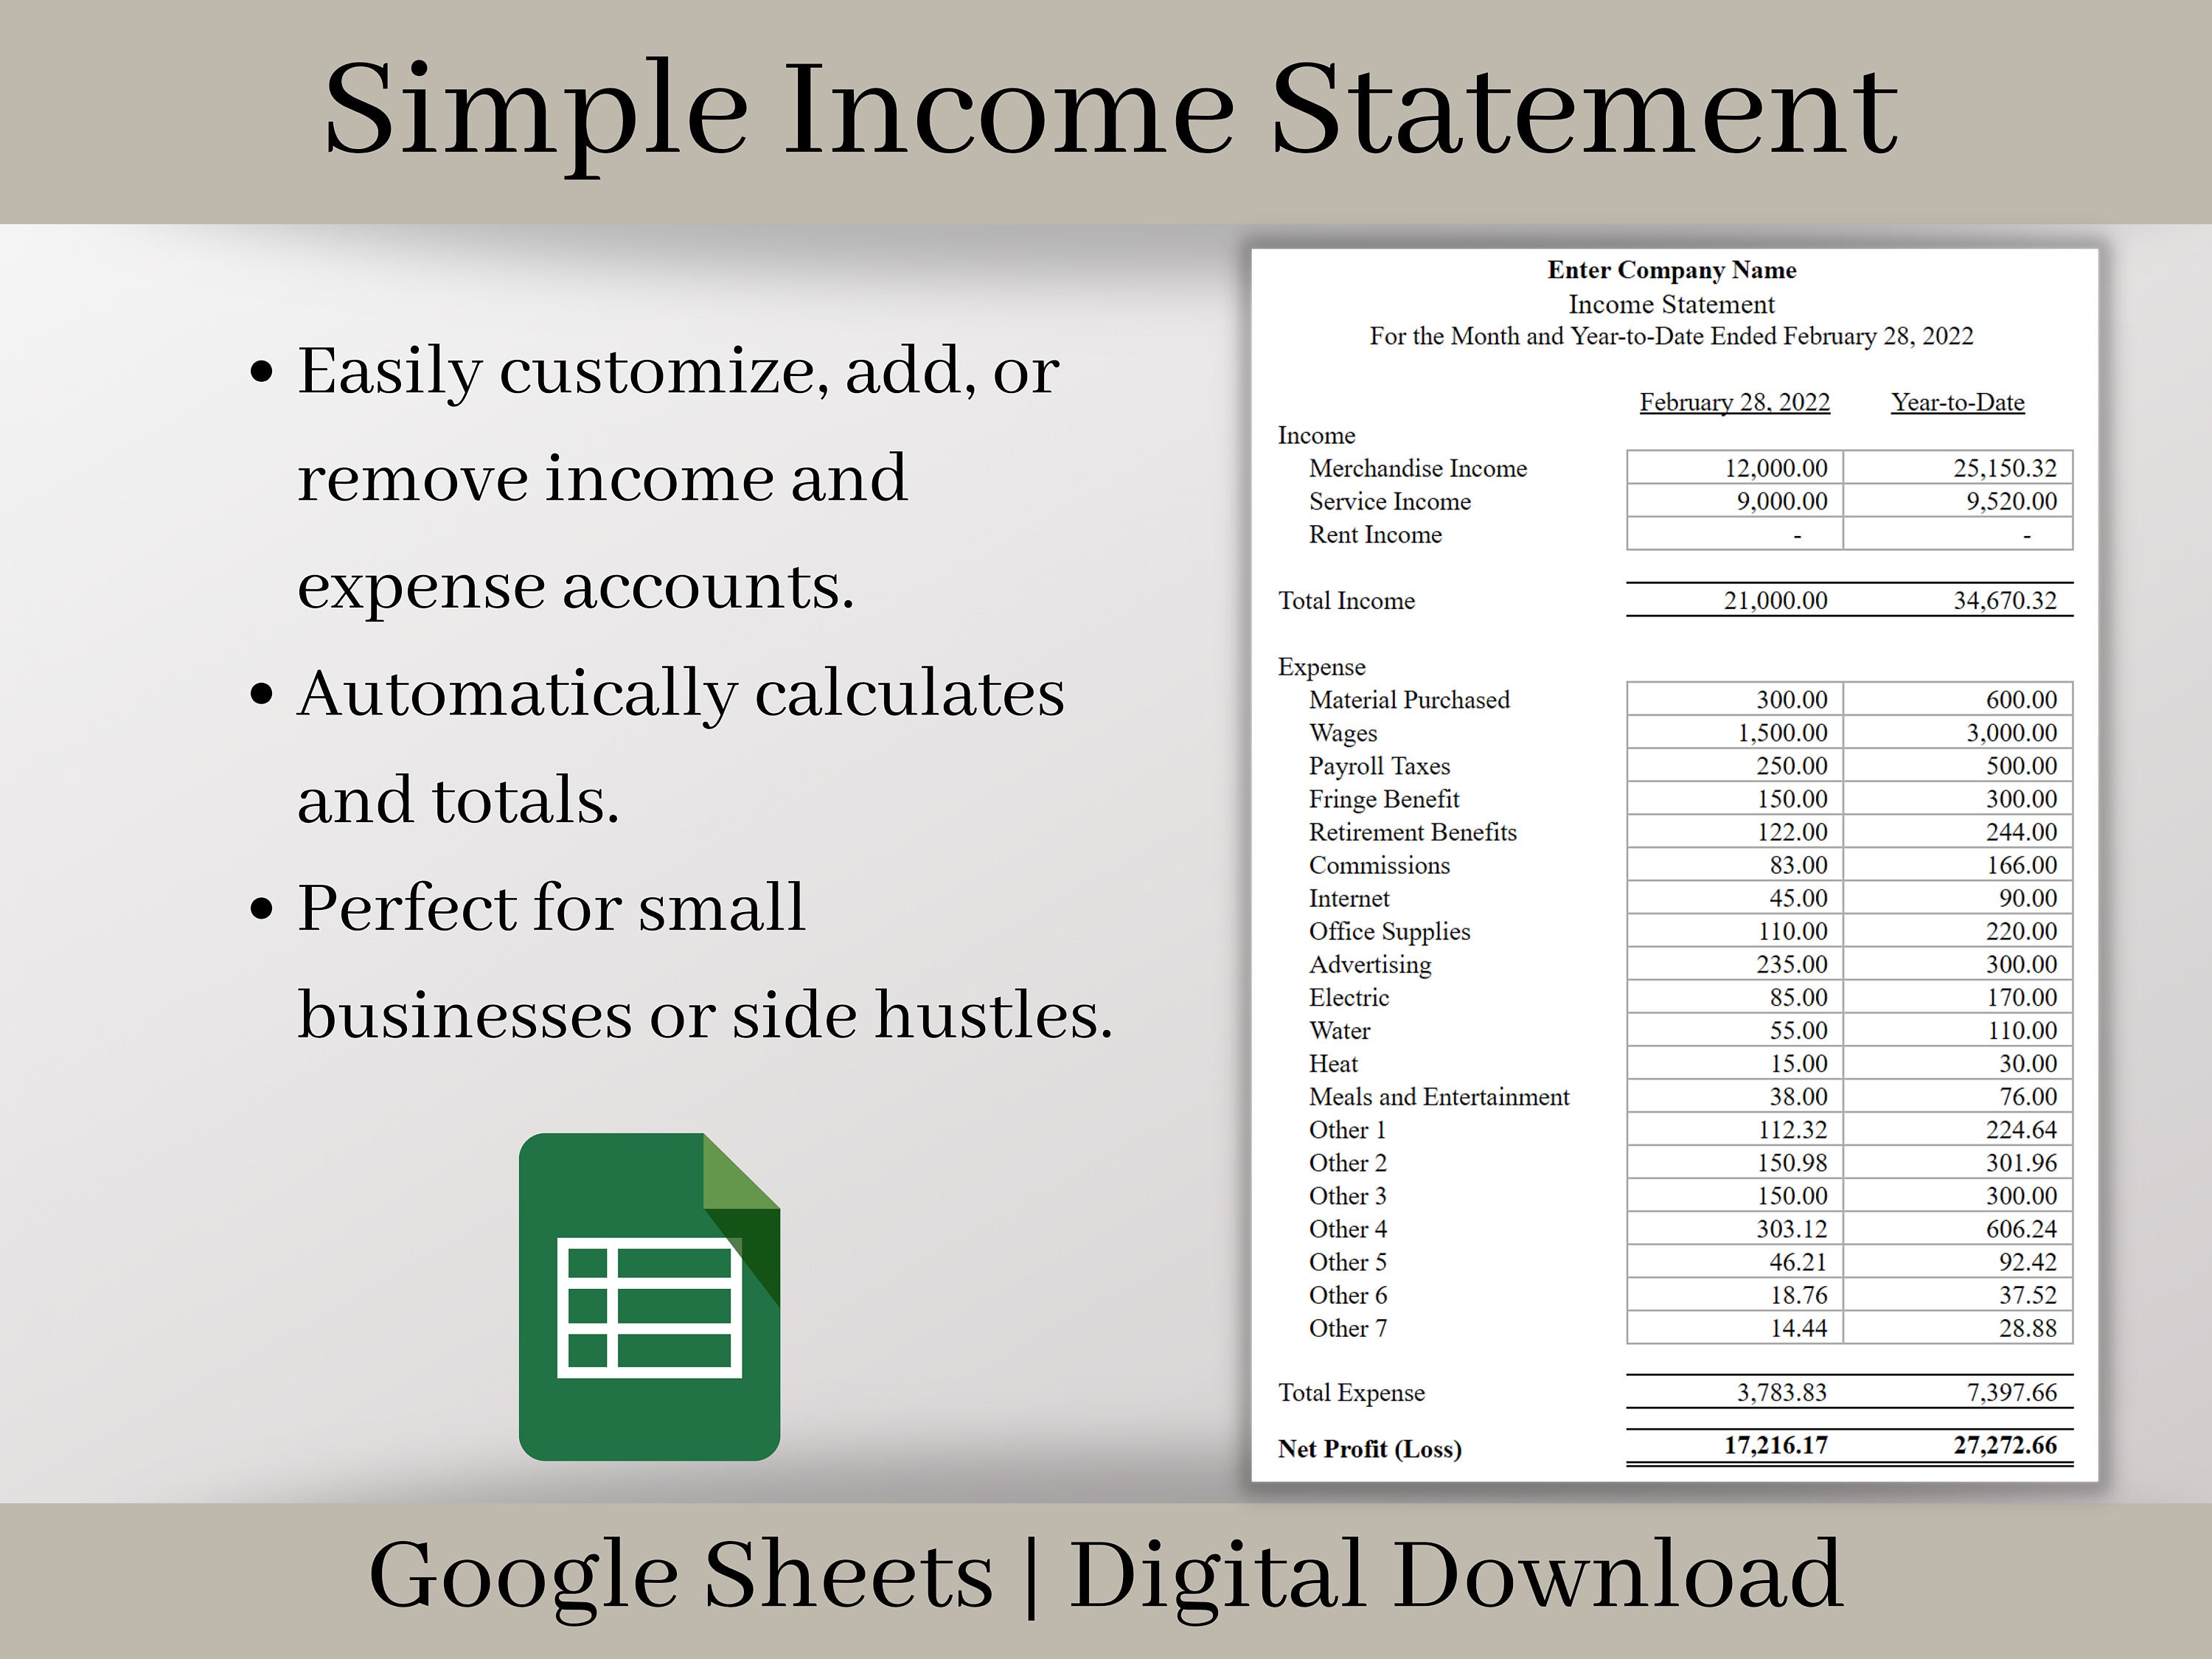 automated-income-statement-google-sheets-template-easy-to-use-profit-and-loss-statement-for